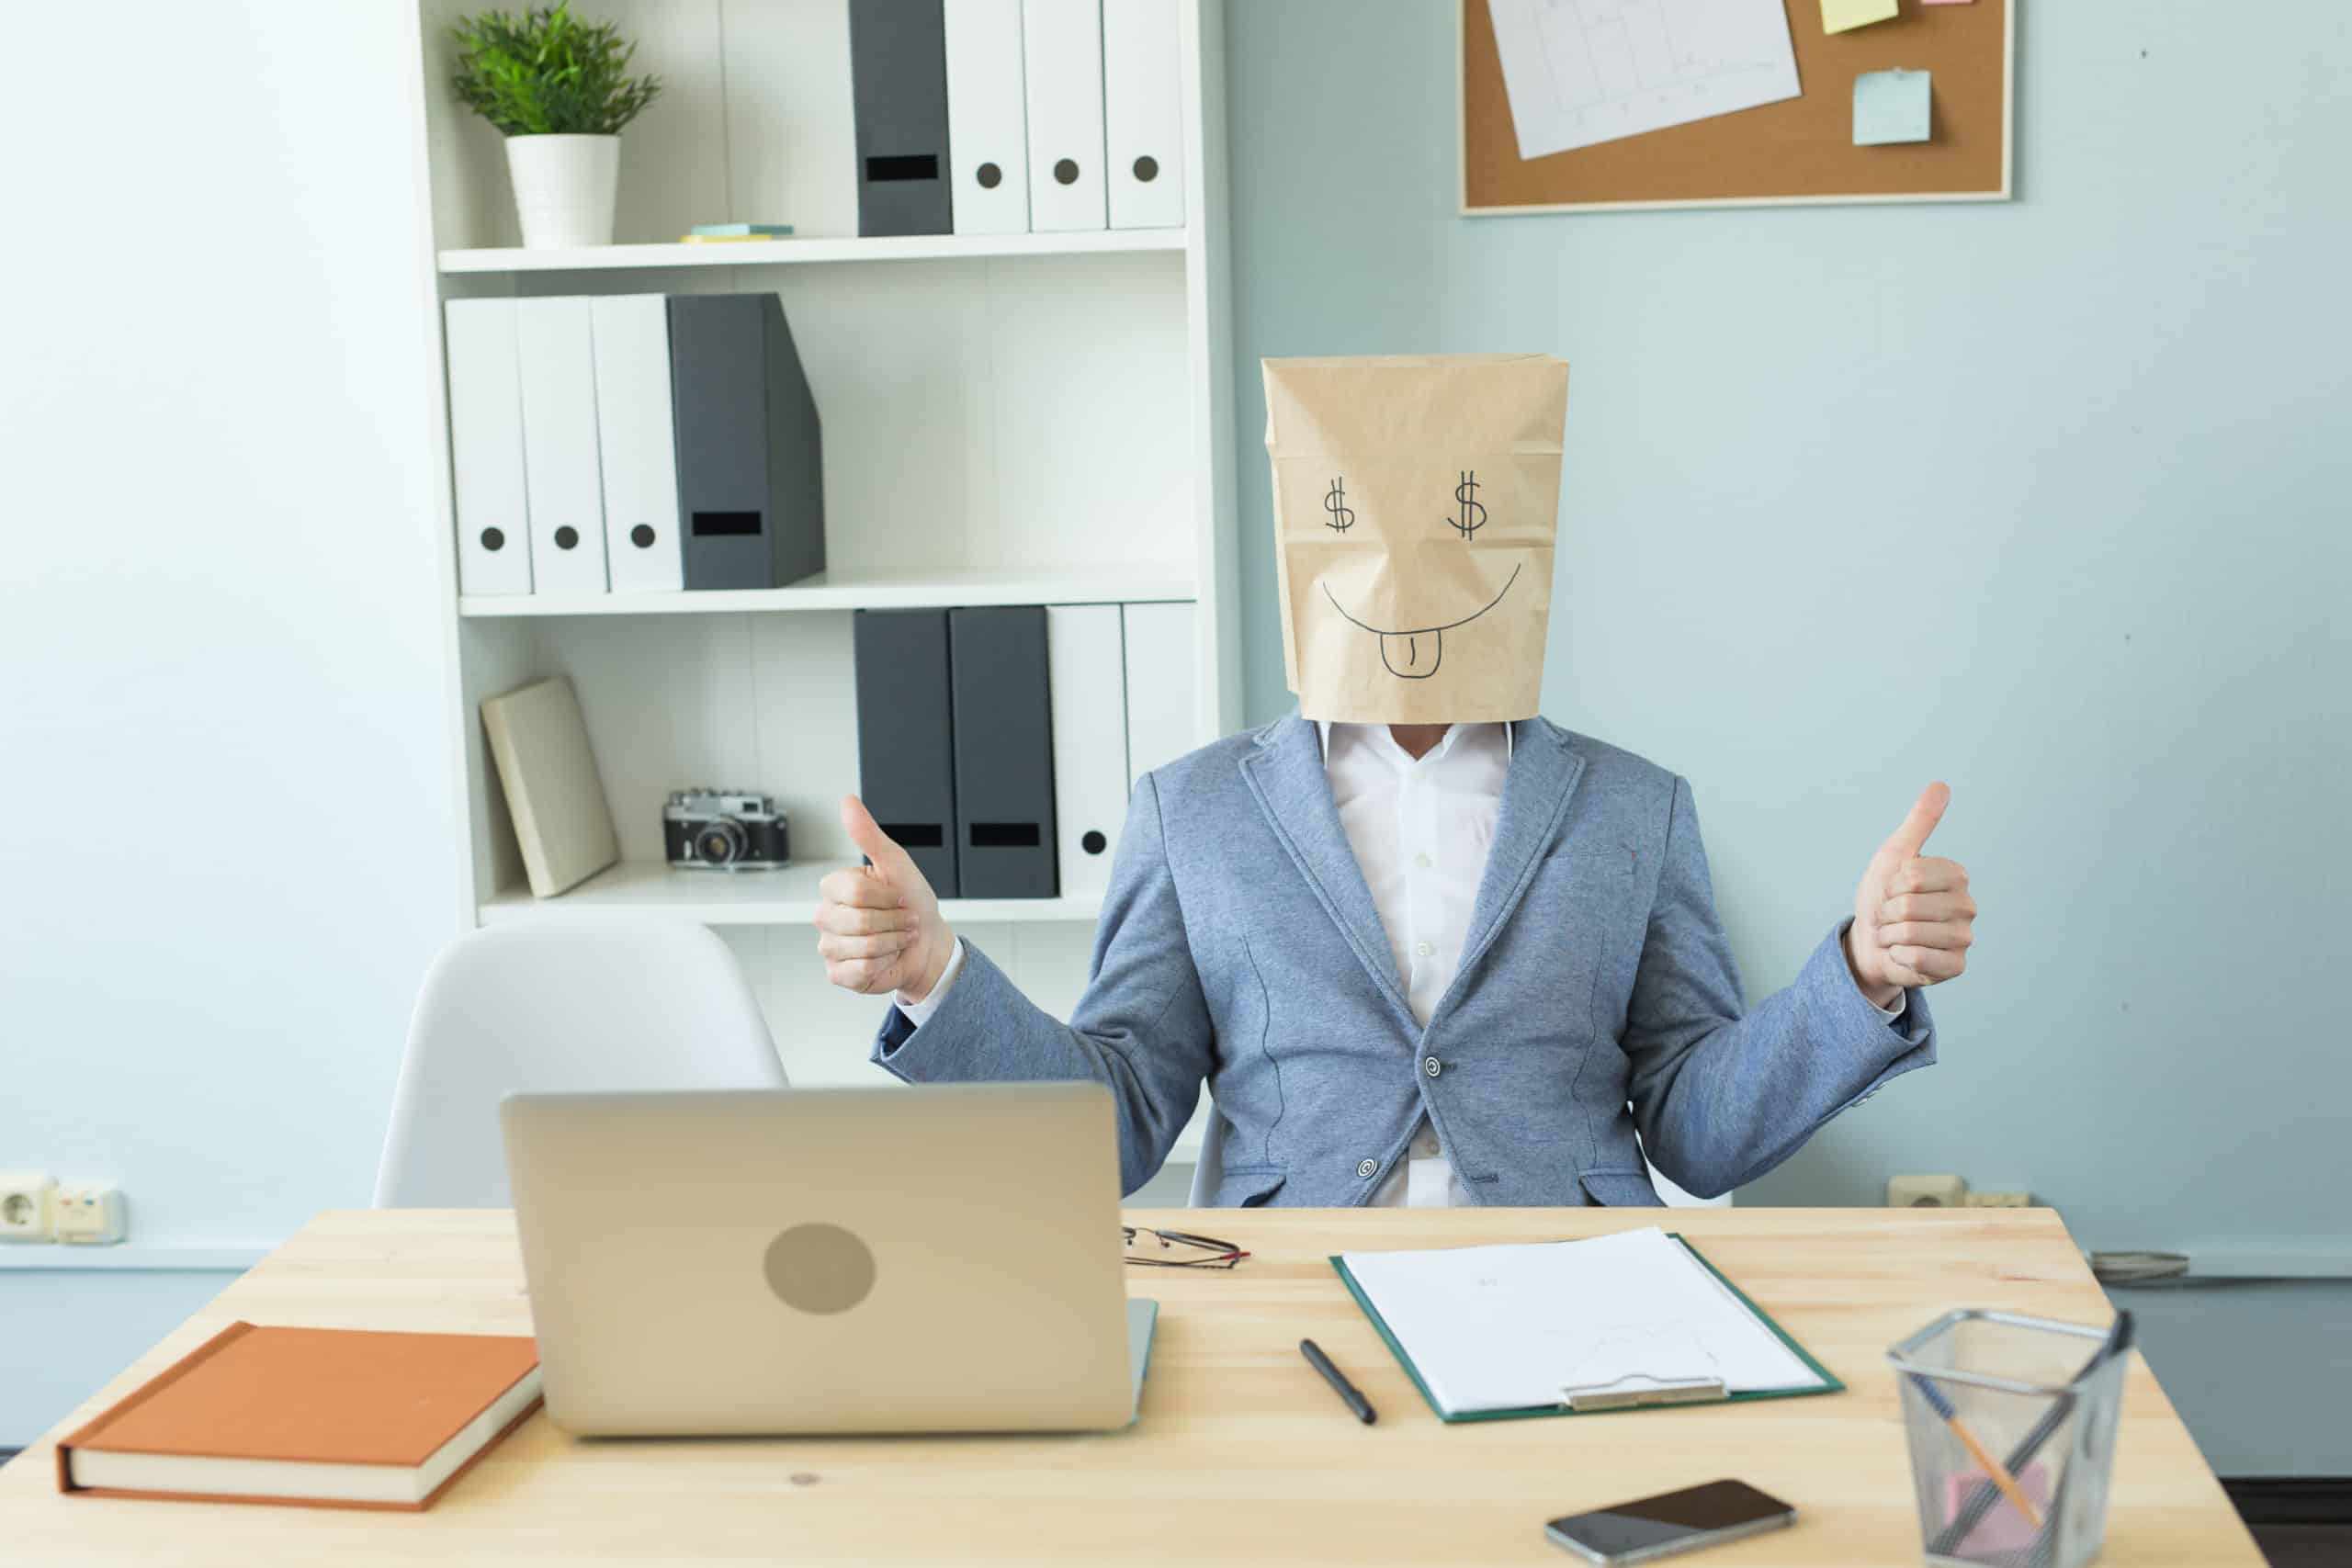 Poor Advice to pay a credit early from fake expert hiding behind a computer with a bag on their head to hide their identity